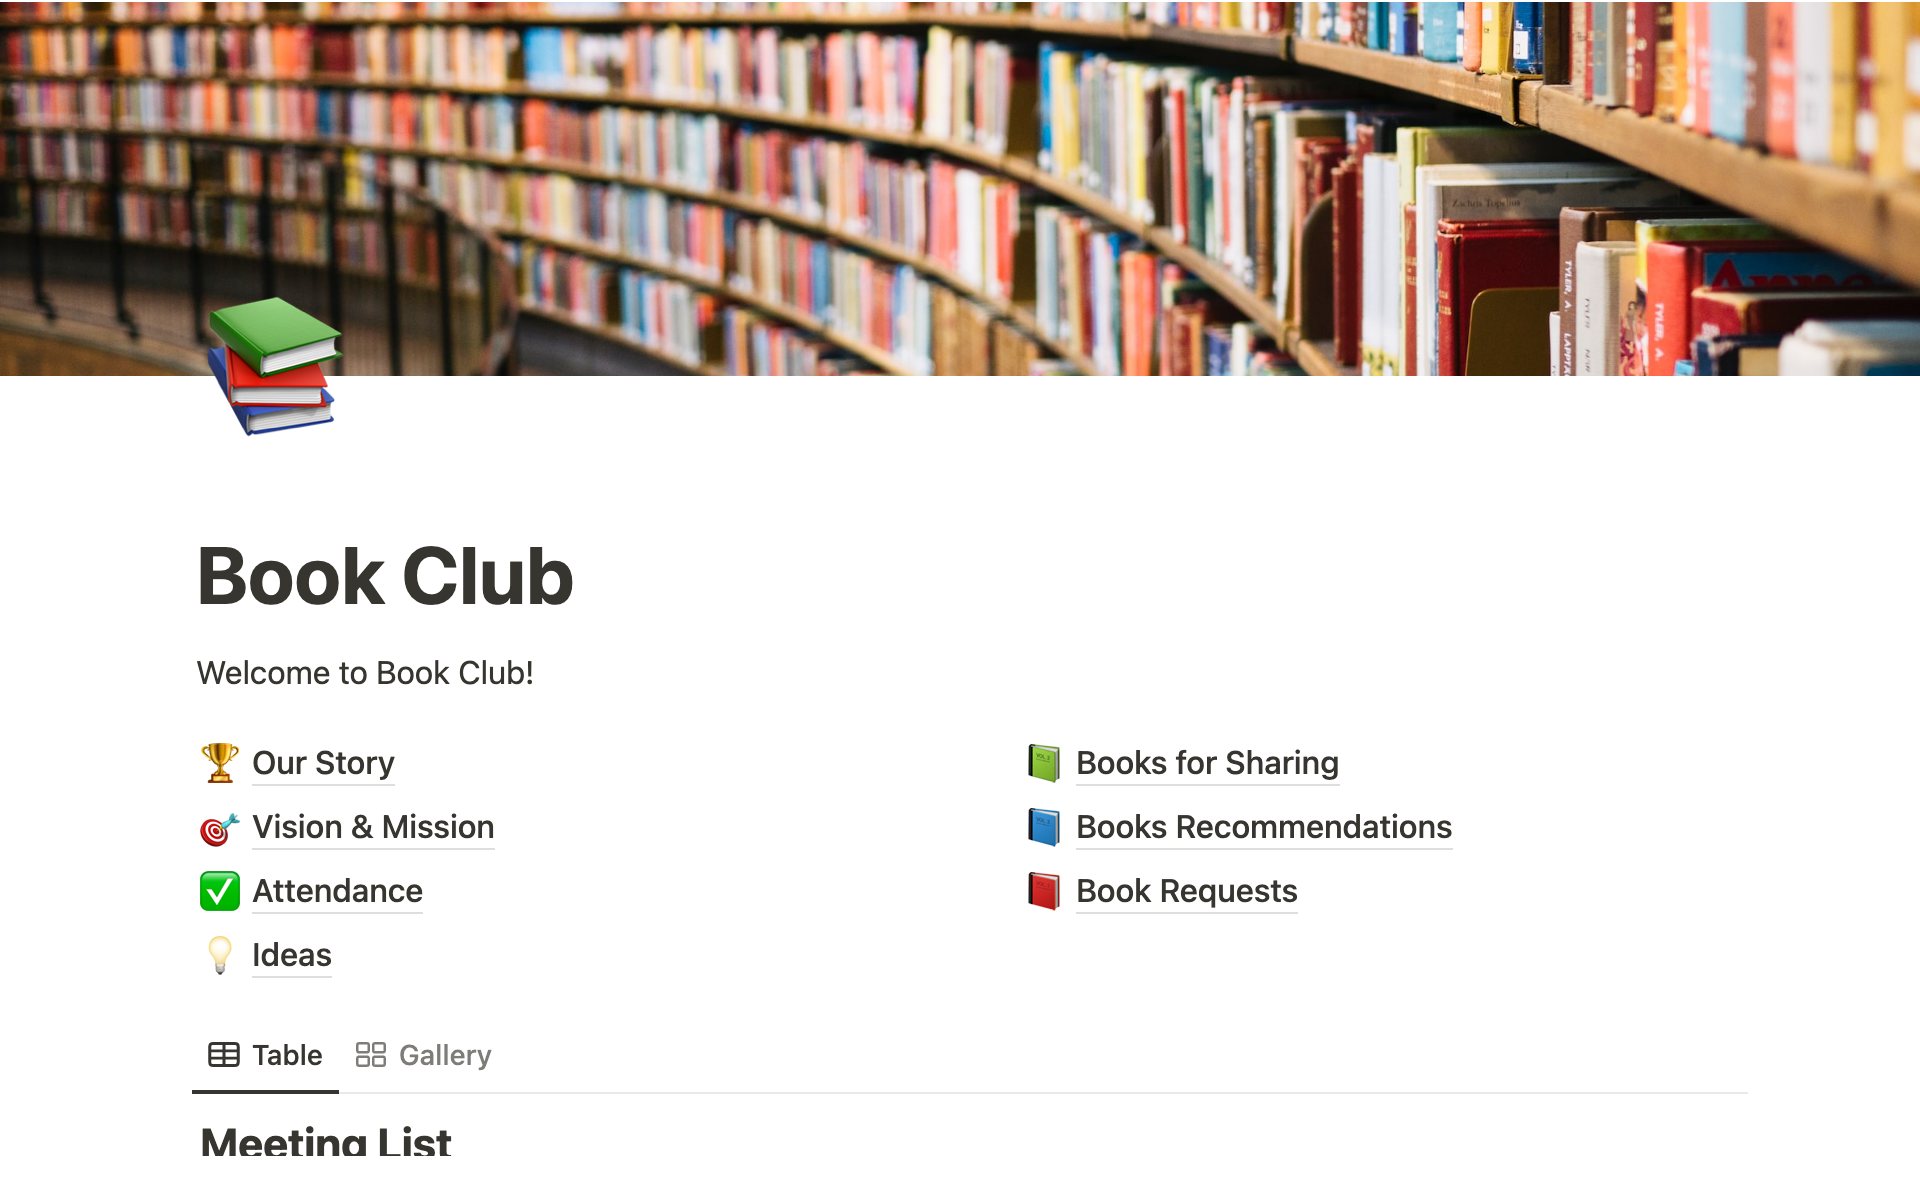 A complete page for a Book Club / Interest-based Community.